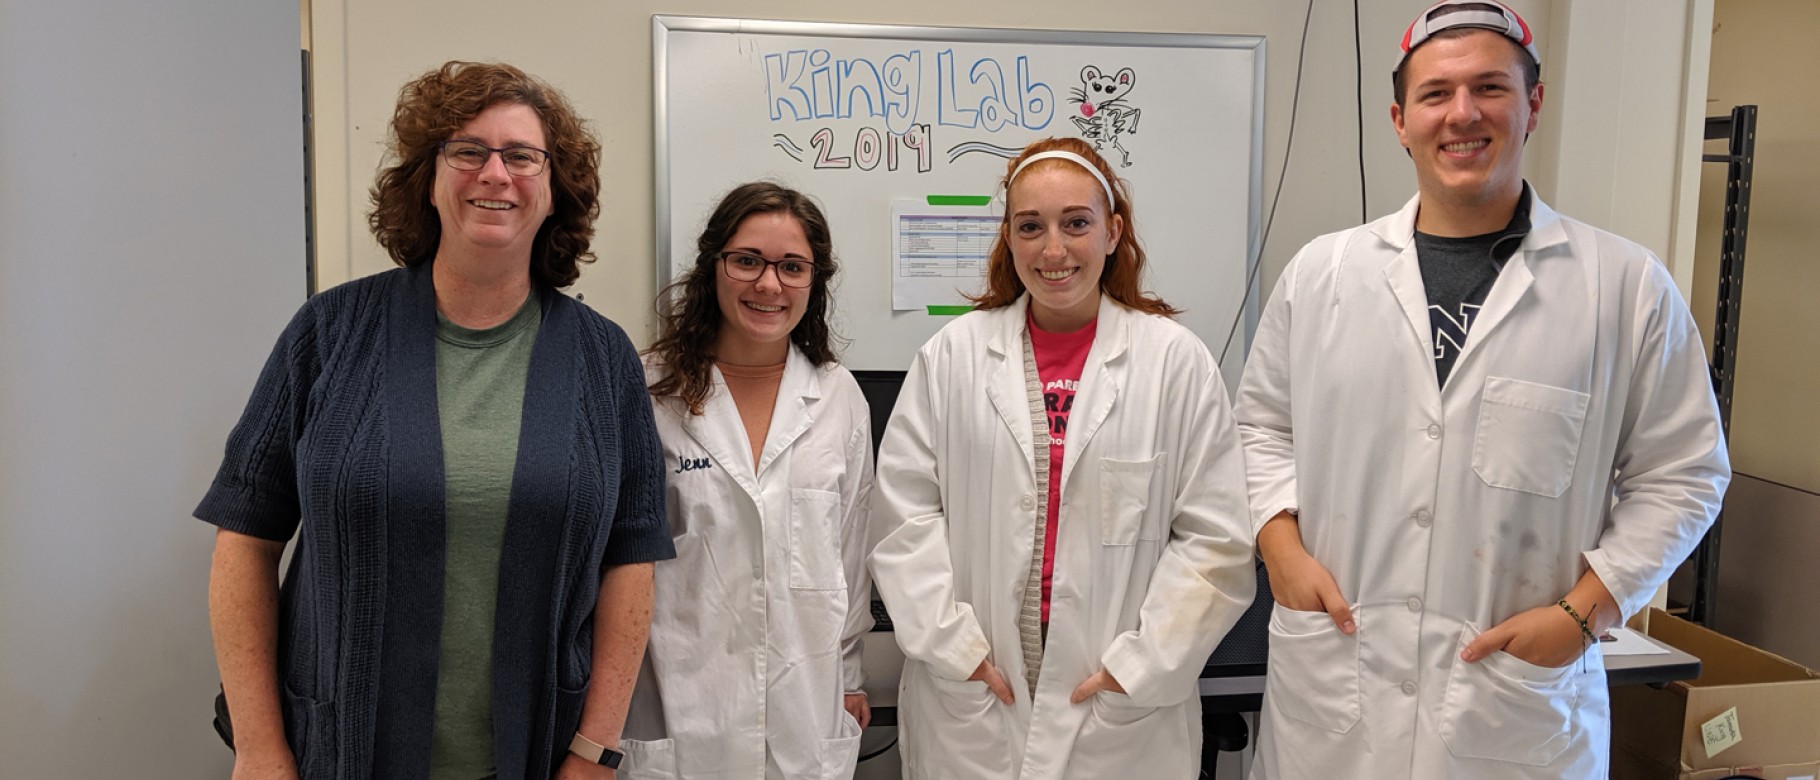 Members of the King Lab: Tamara King, Victoria Eaton, Caitlyn Daly, and Andrew Elkinson